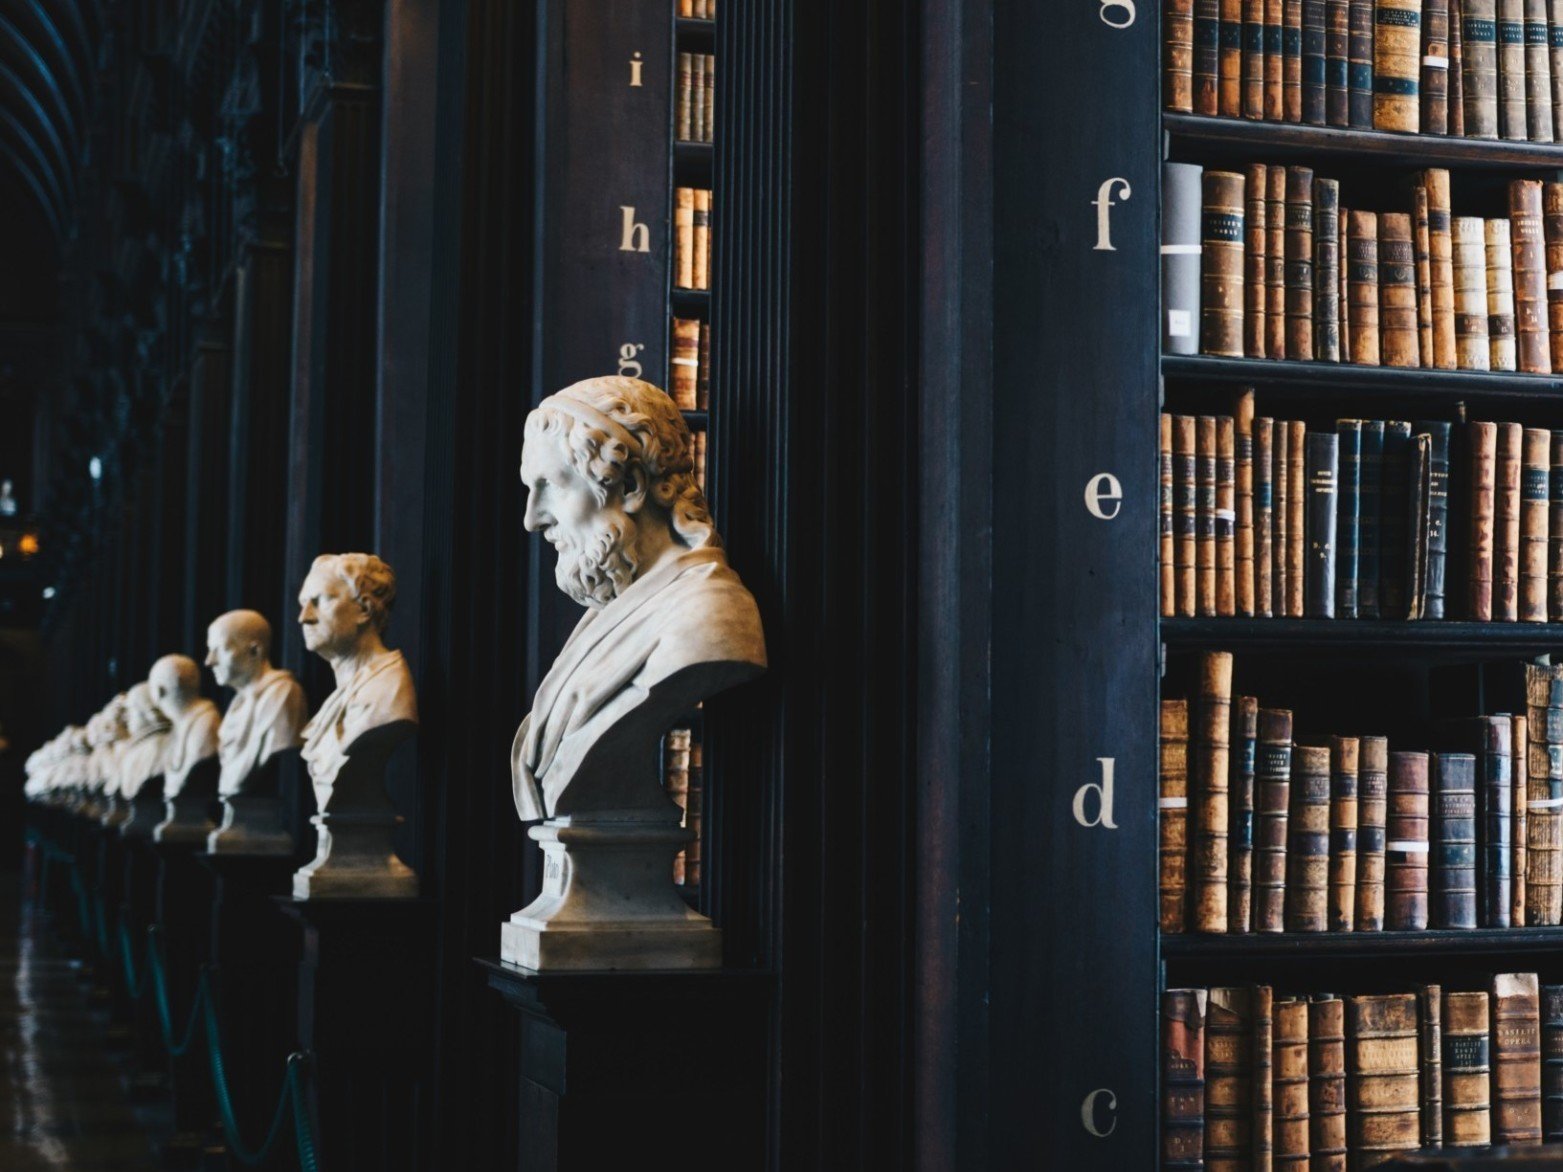 busts of notable scholars